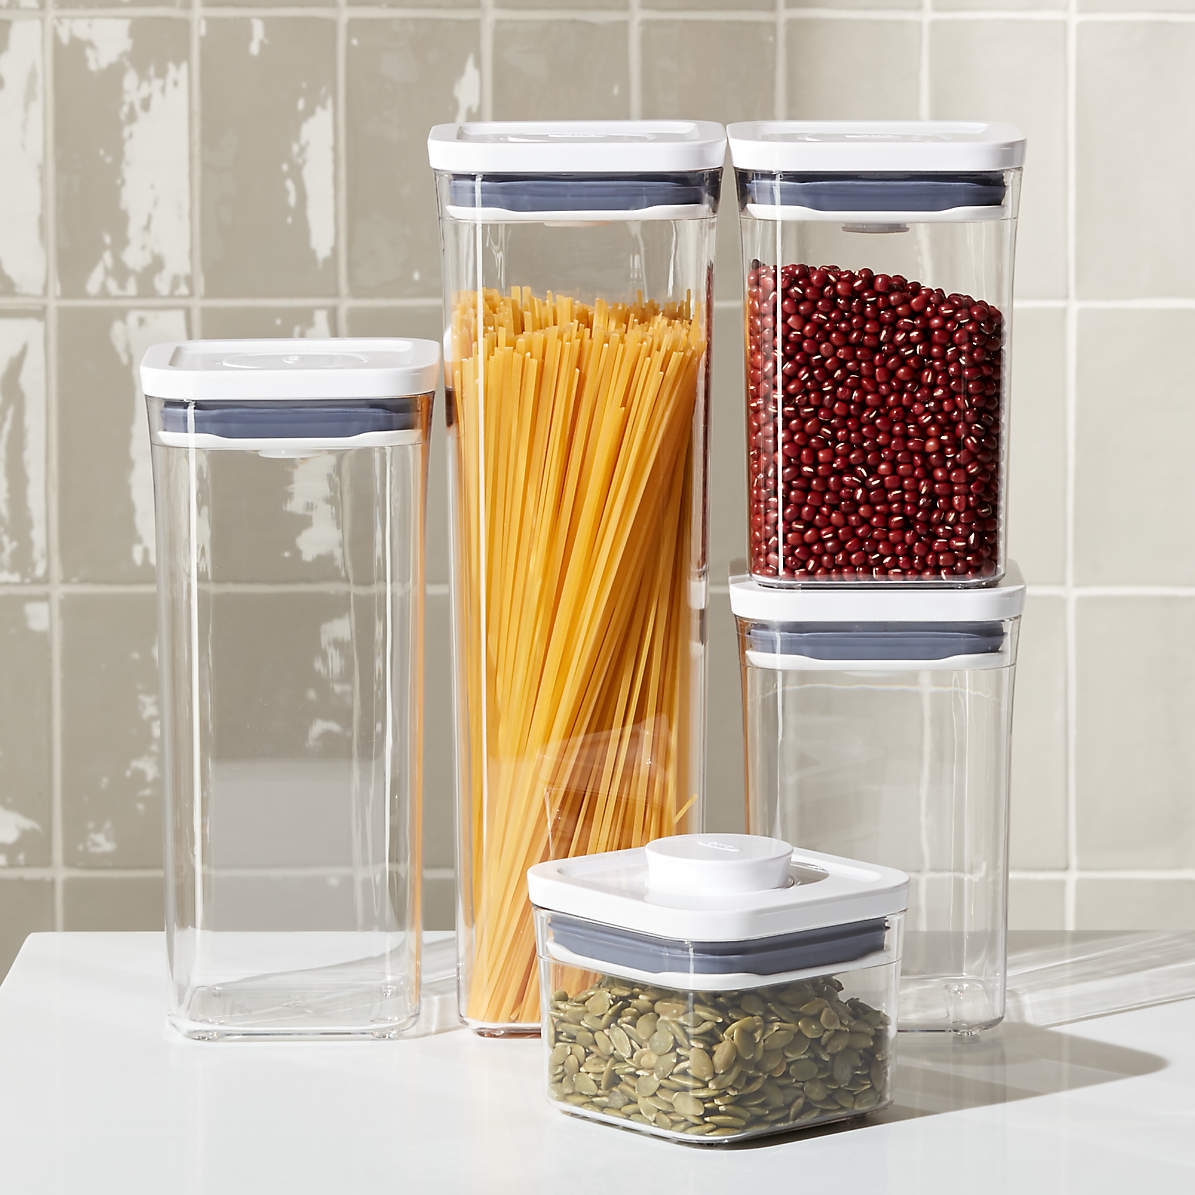 OXO 5-Piece Airtight Food Storage Container Set + Reviews Crate & Barrel